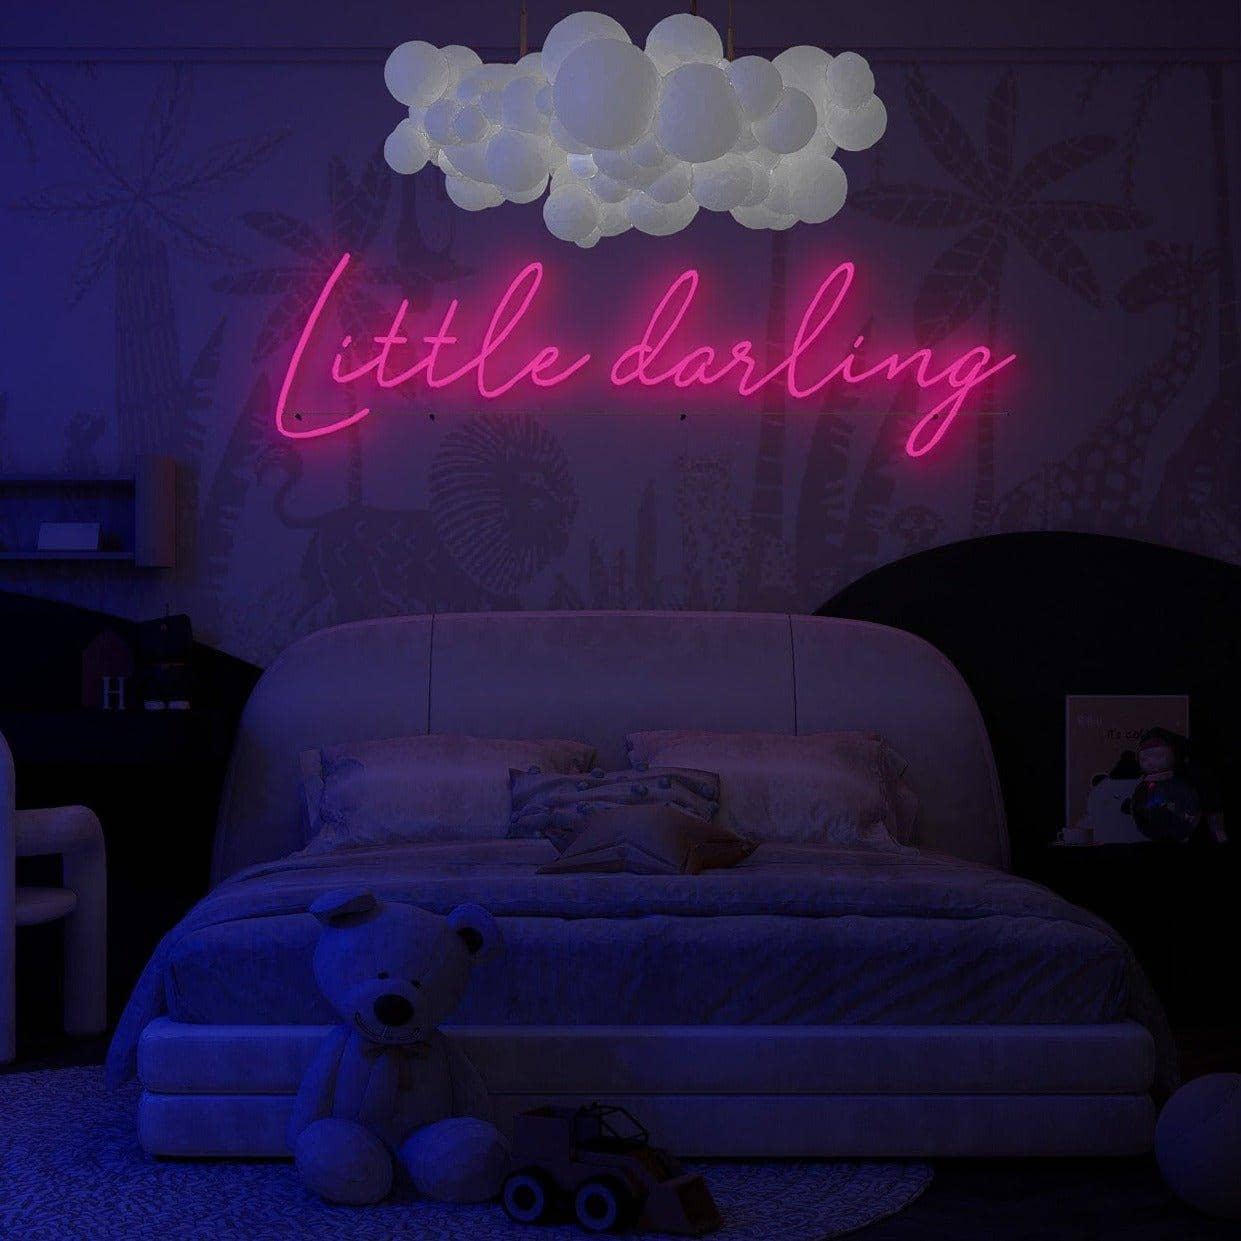 pink-neon-lights-are-lit-up-at-night-and-displayed-in-the-bedroom-little-darling